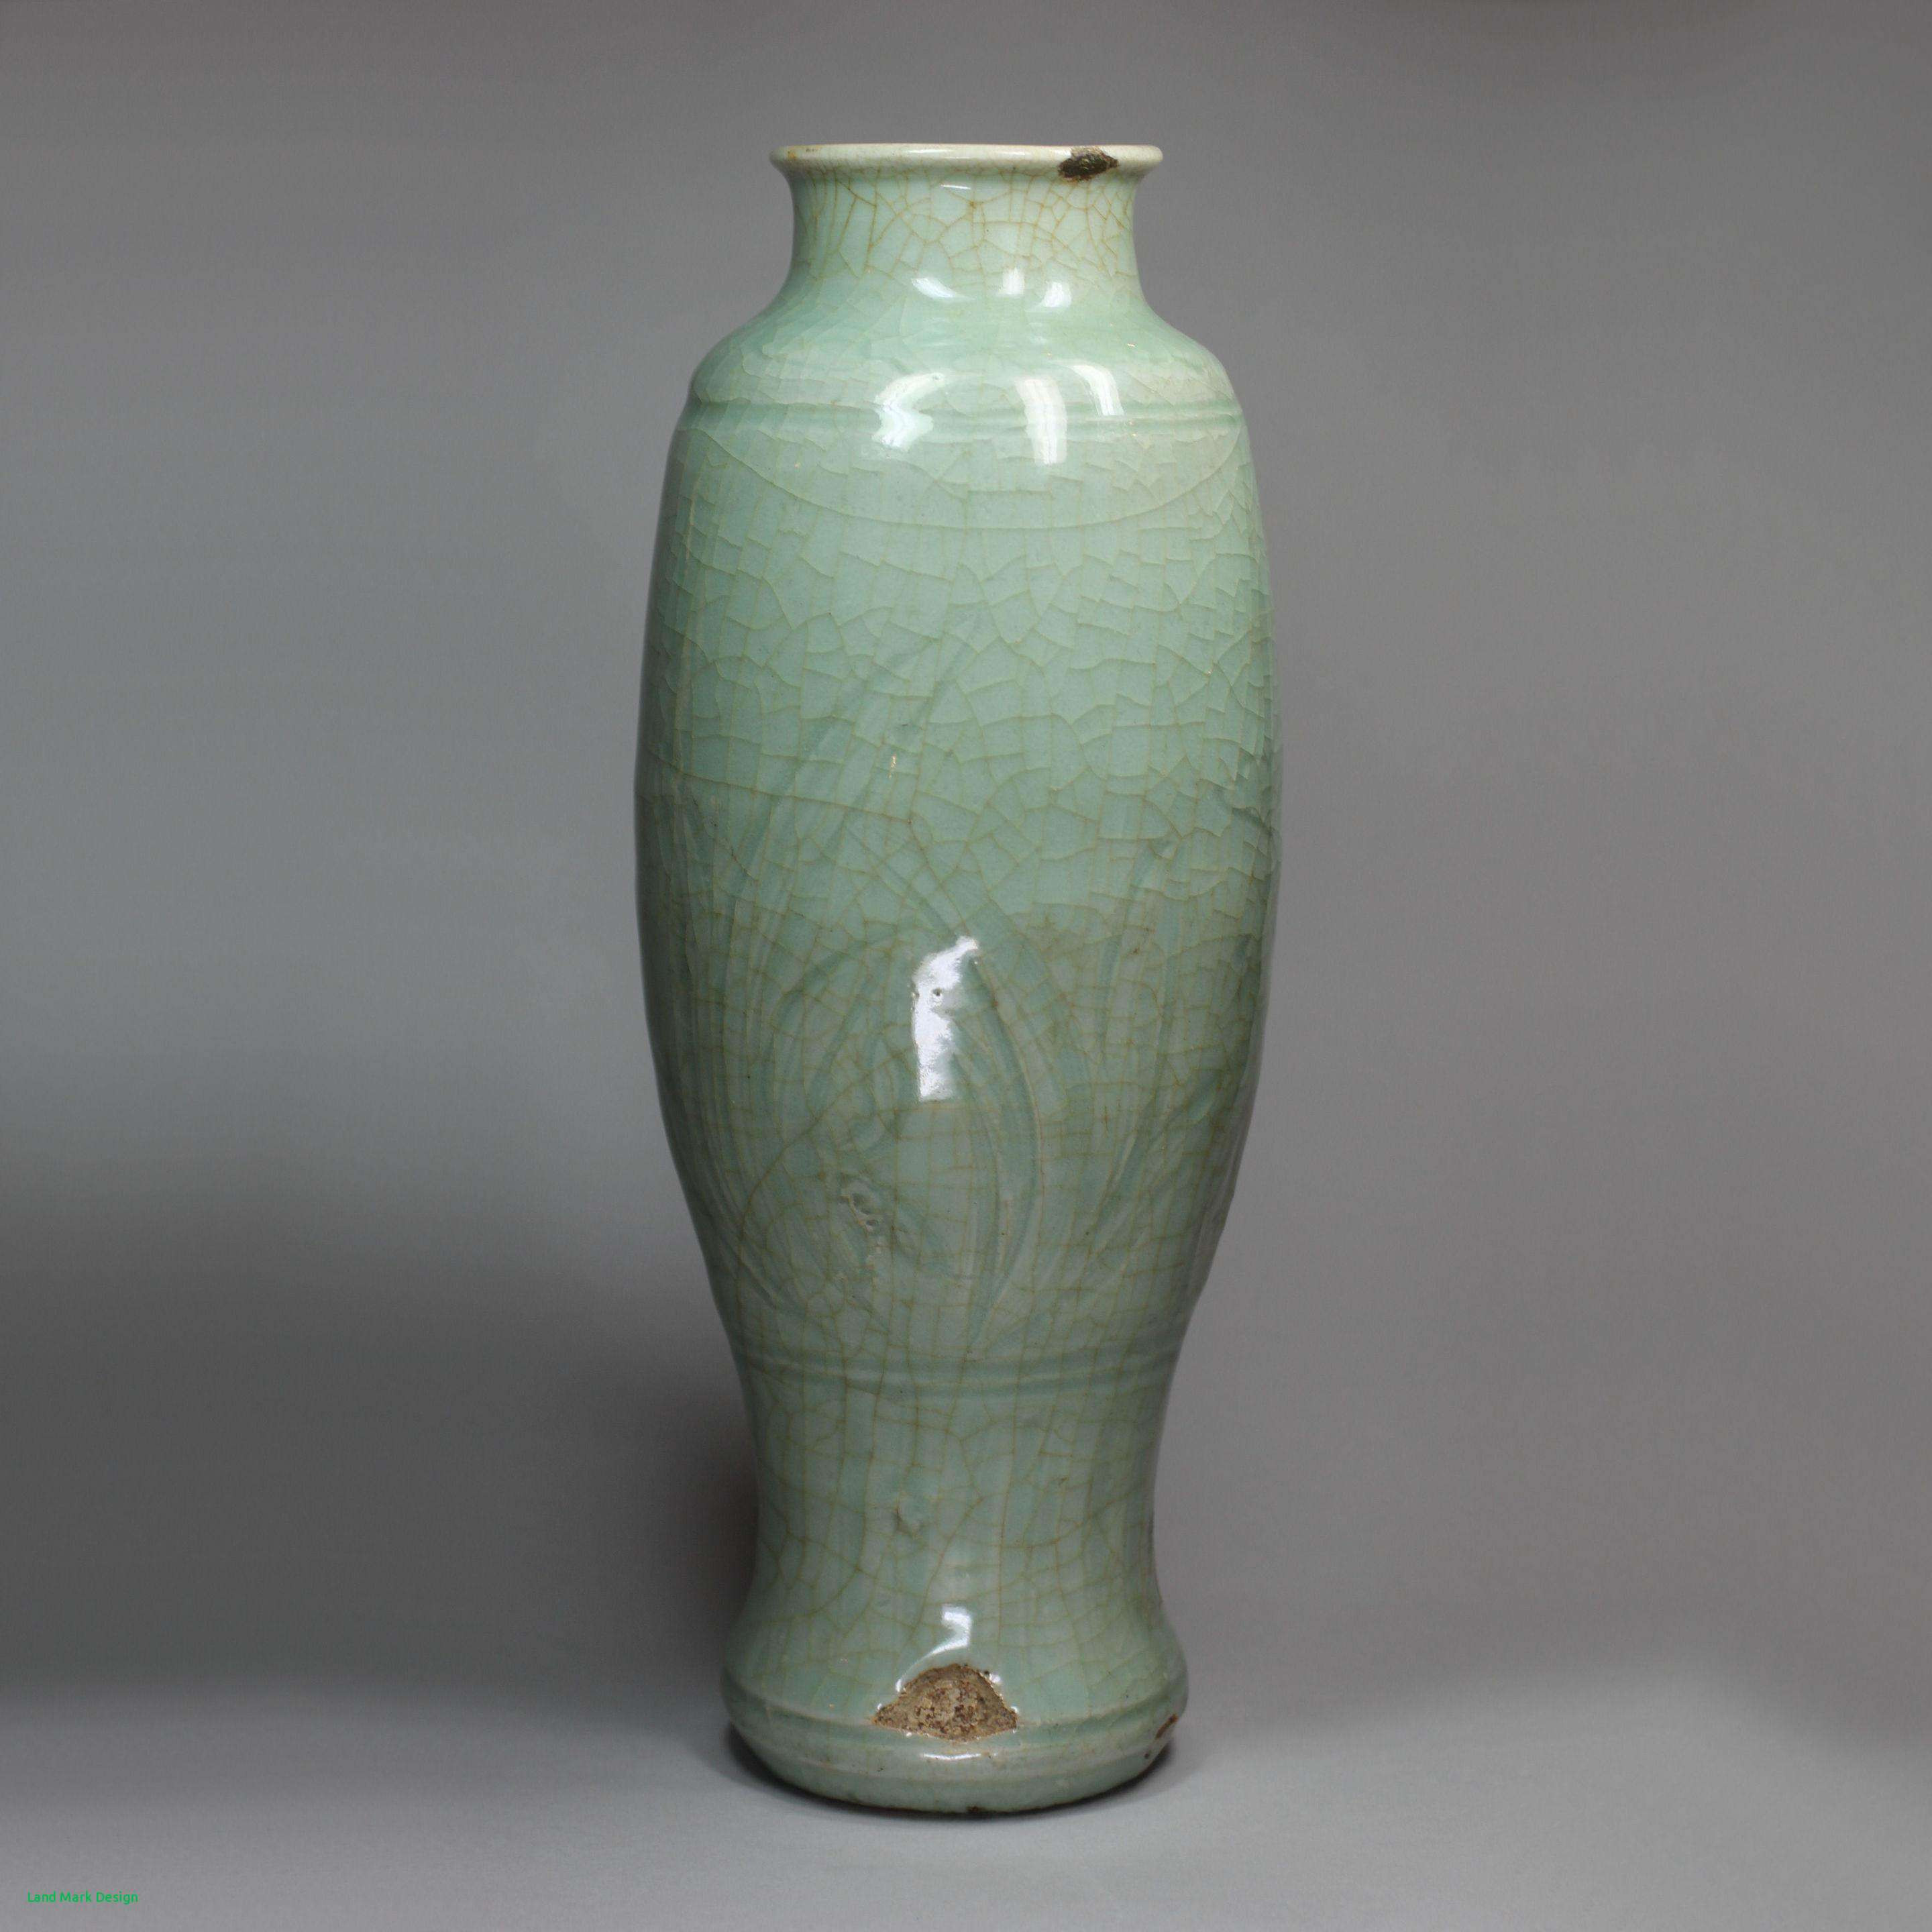 16 Recommended Satsuma China Vase 2024 free download satsuma china vase of huge vases design home design throughout full size of living room gold vases bulk fresh xxy663h vases chinese celadon vase here large